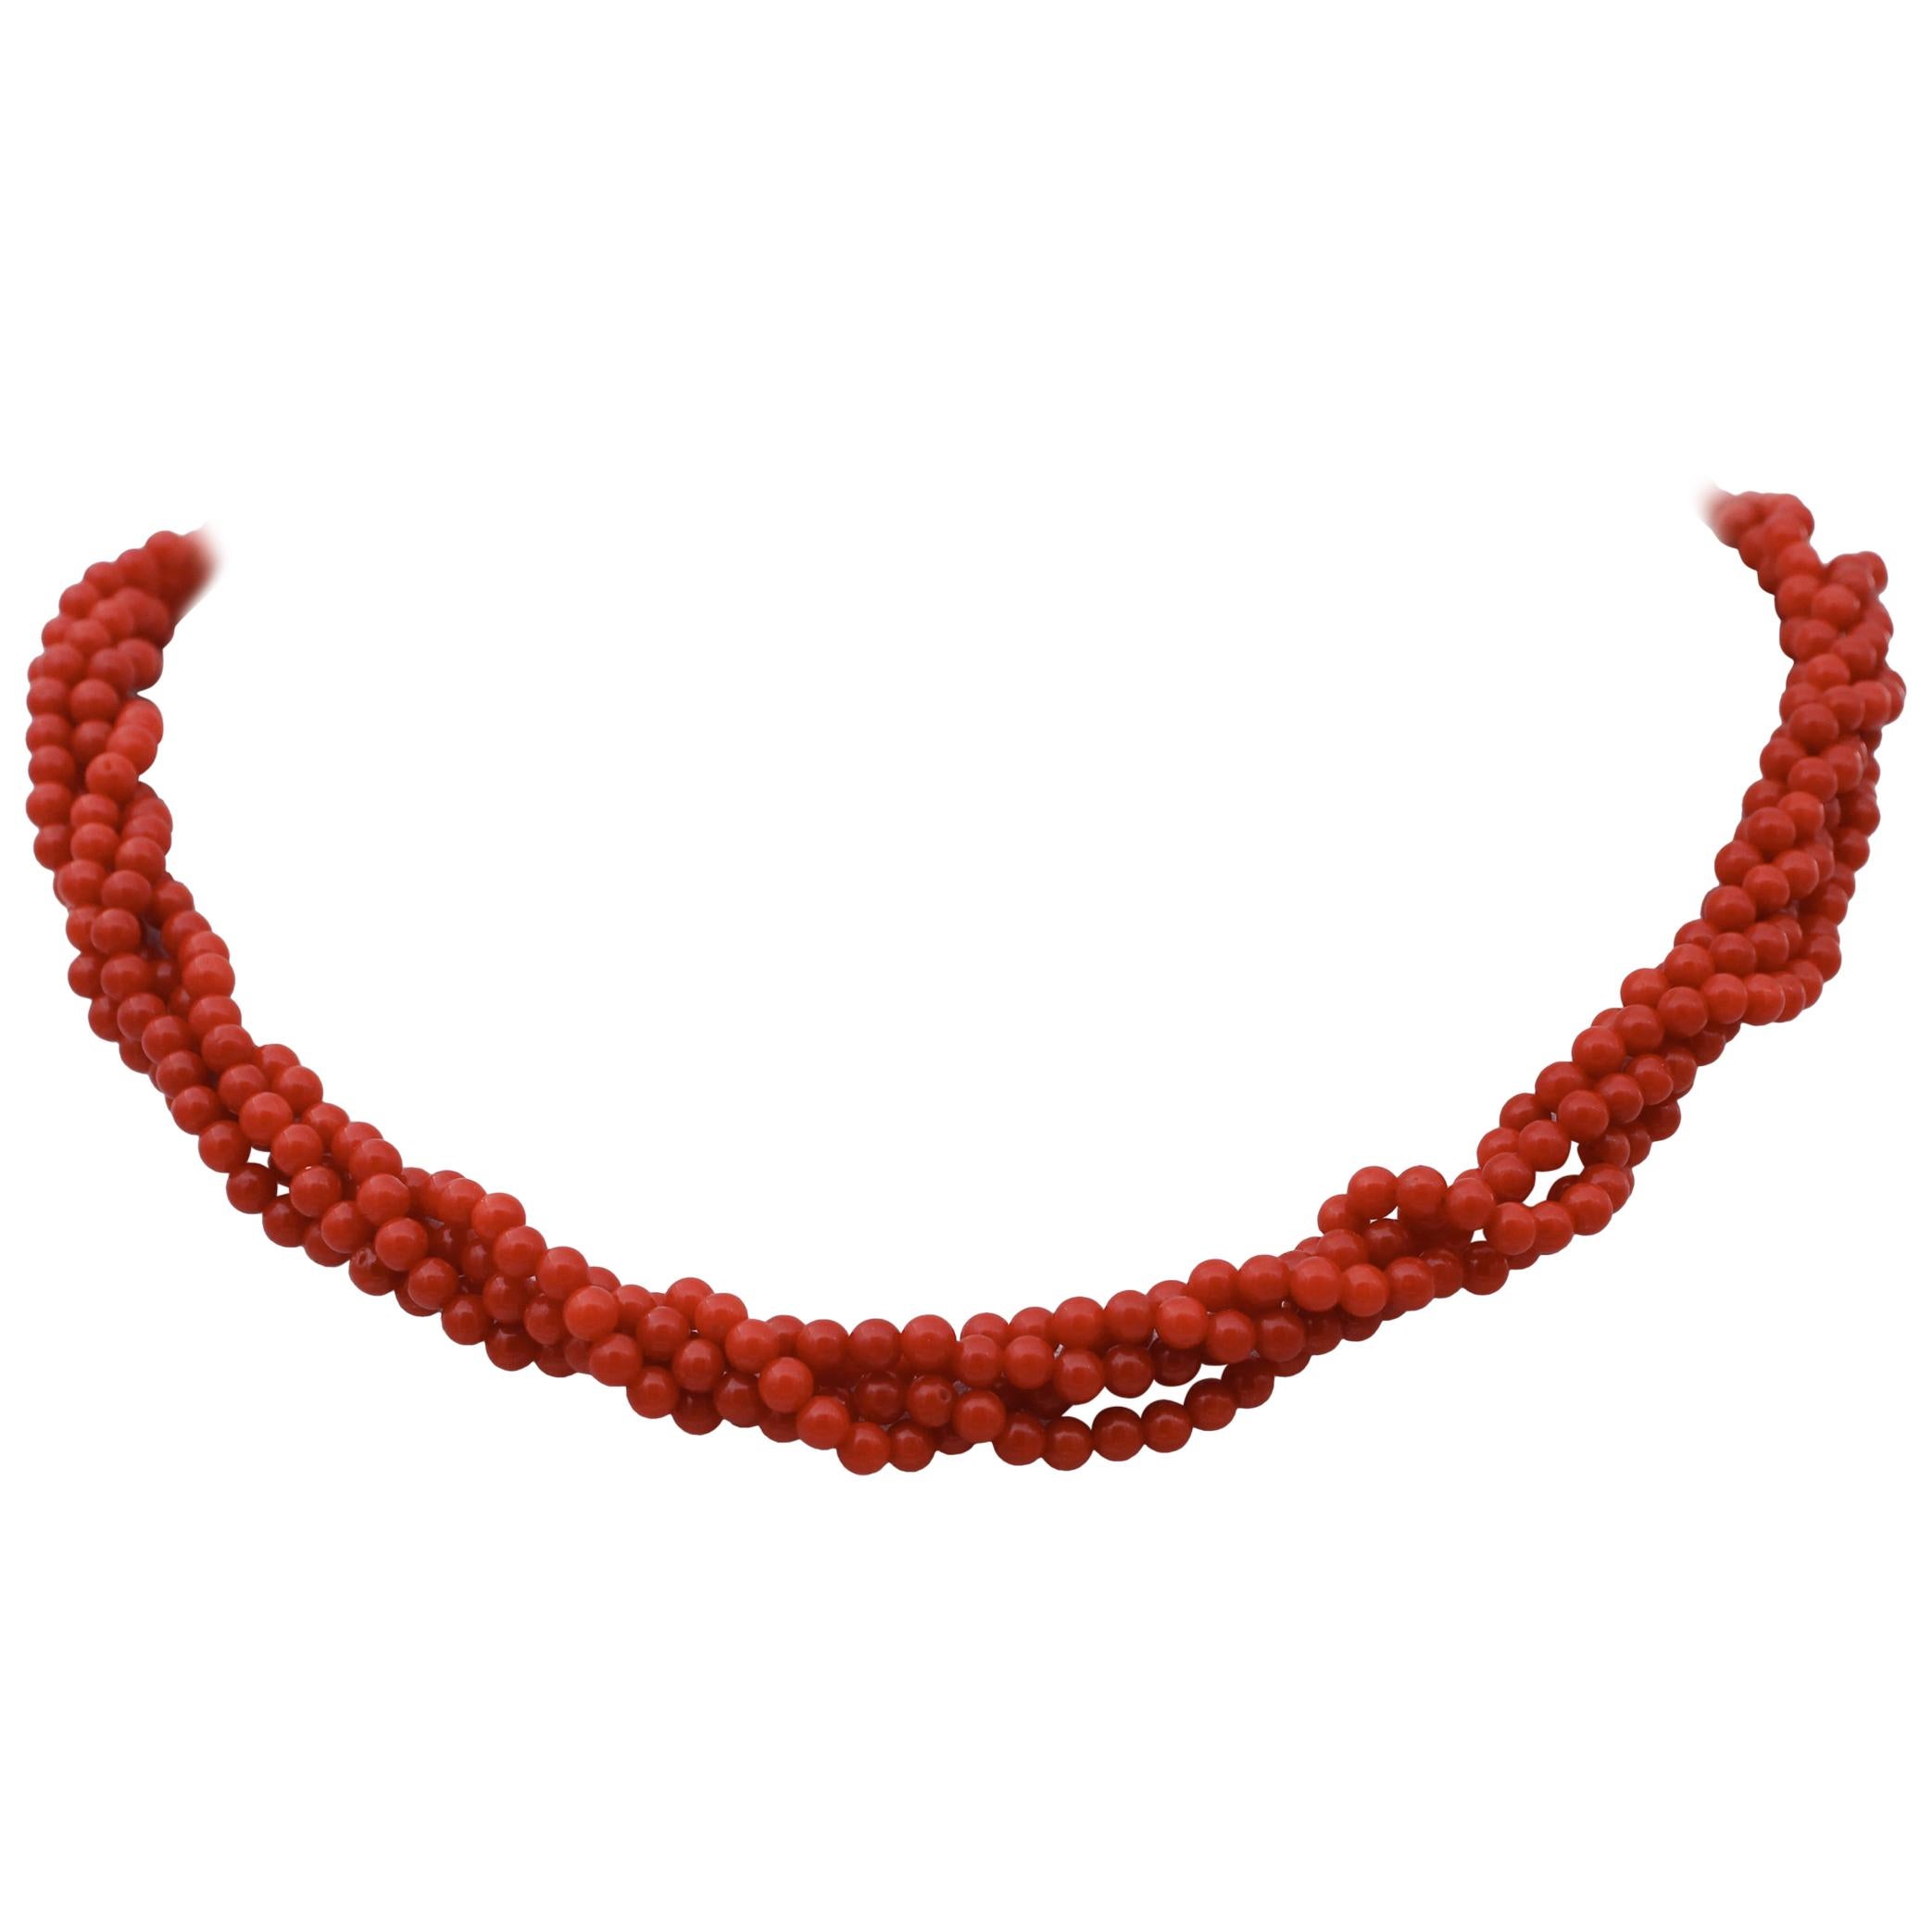 Red Coral Torchon Necklace with 18 Karat Yellow Gold Closure